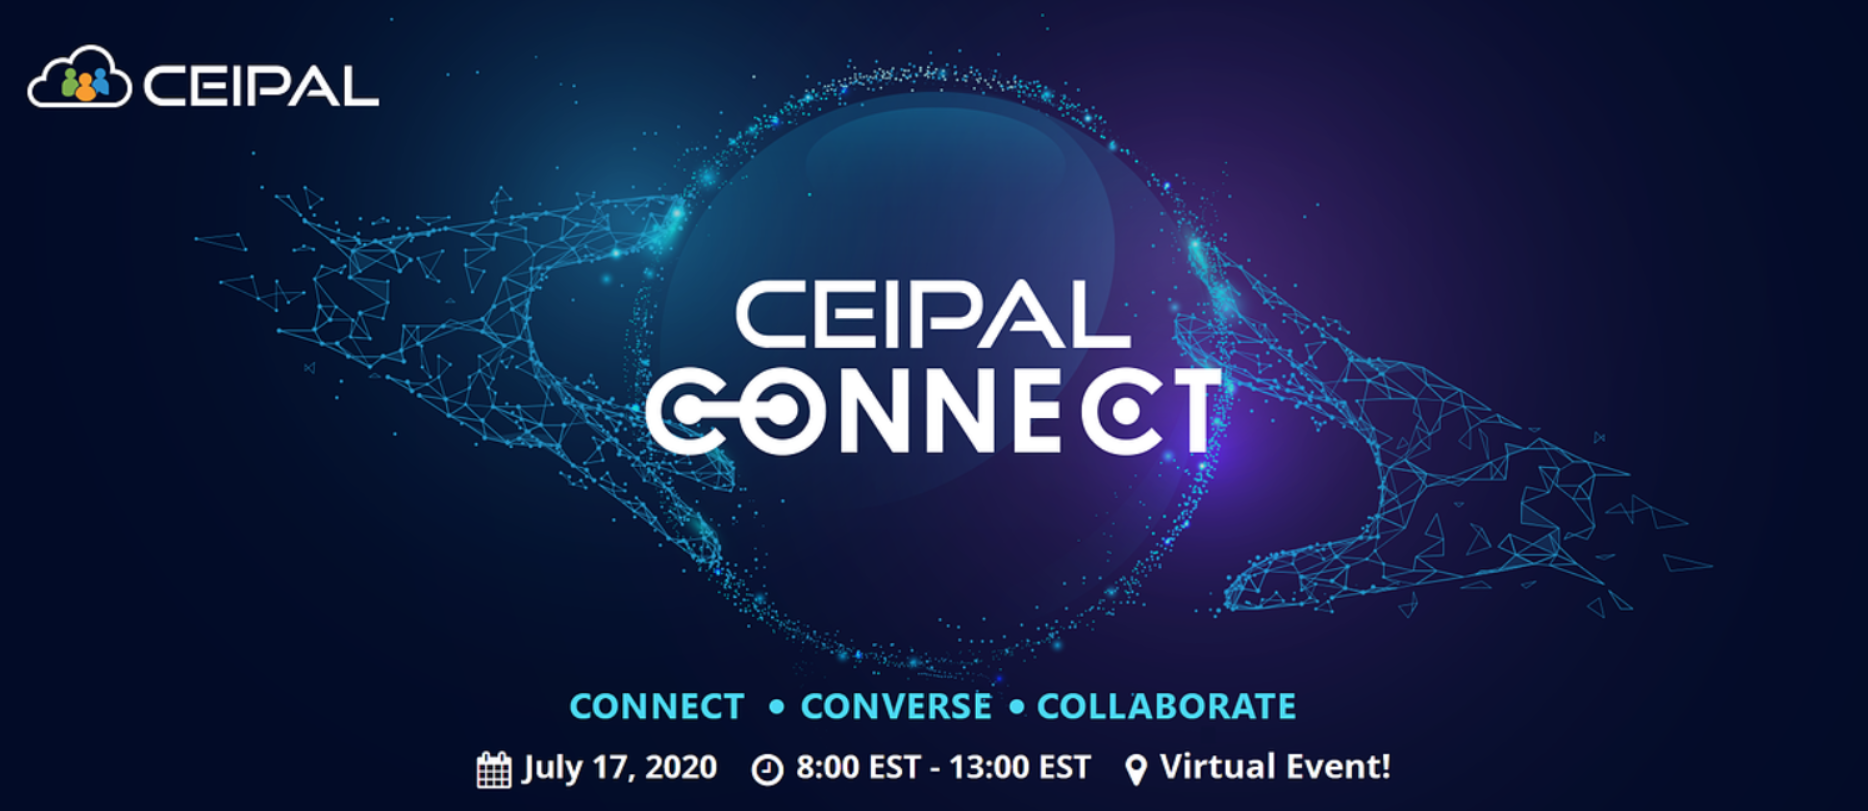 In Response to COVID-19, CEIPAL Announces Company’s Popular “CEIPAL Connect” Conference Will Go Virtual for 2020